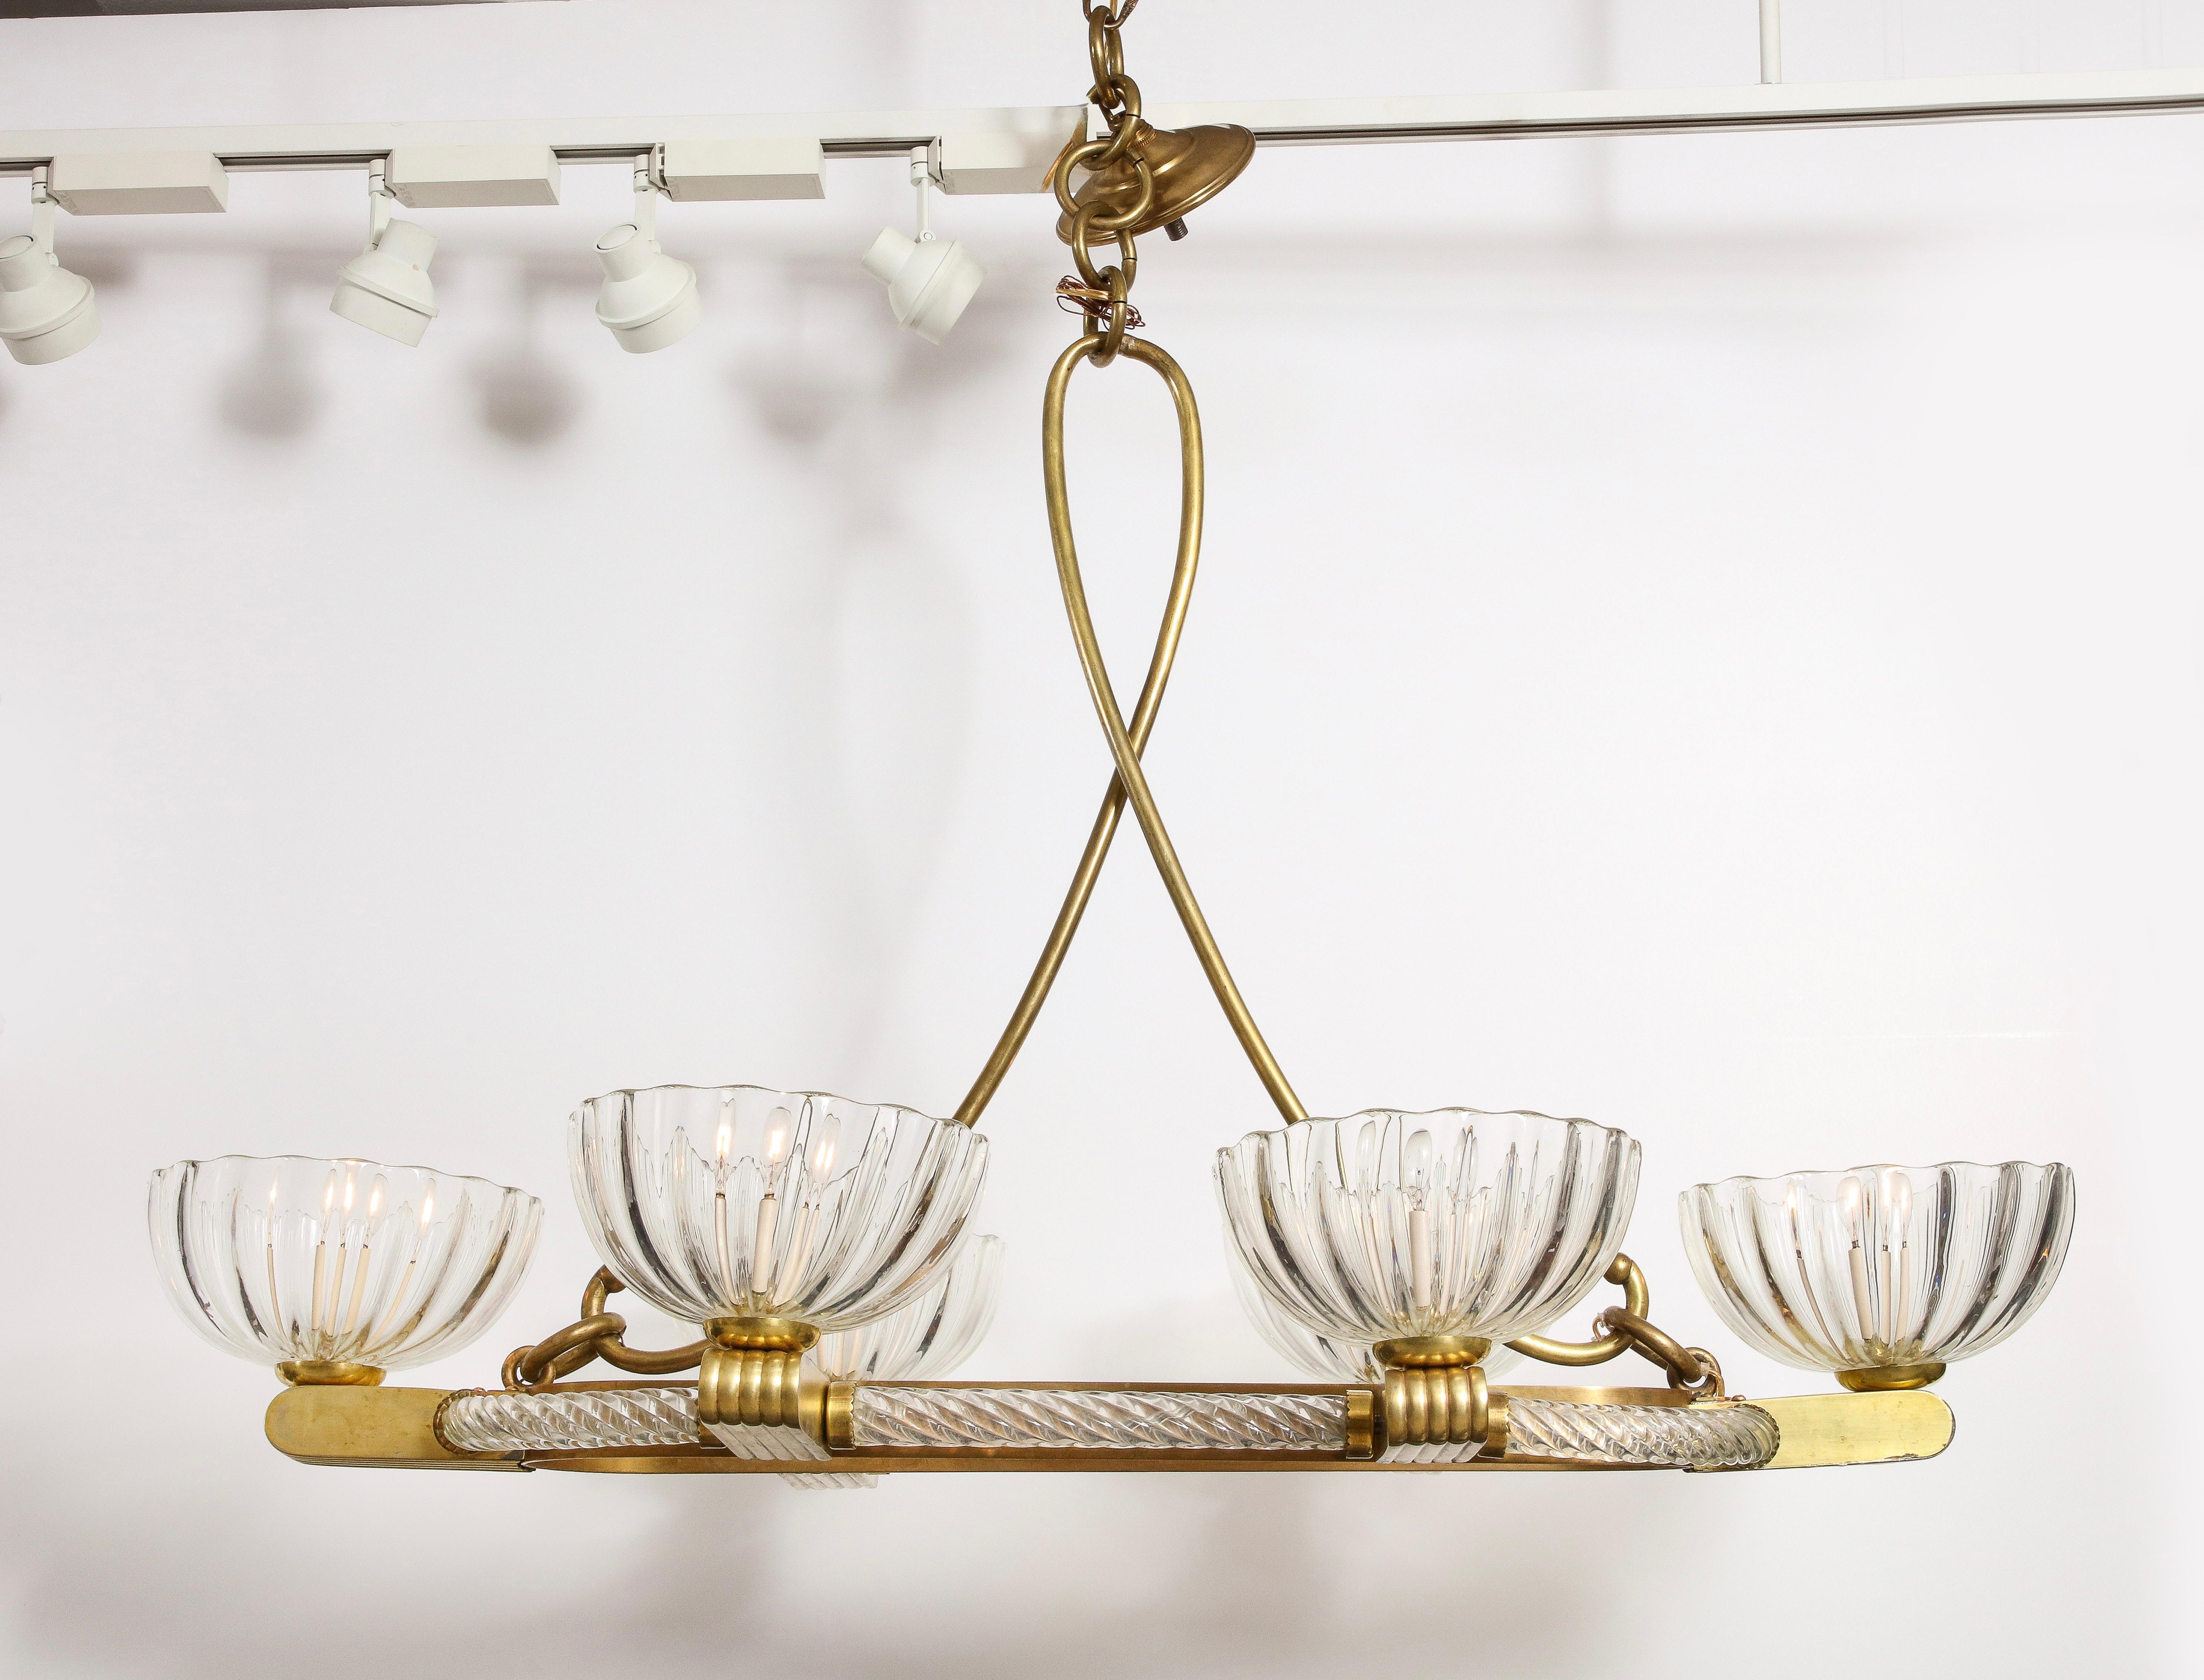 A Livio Seguso mid-century six light Murano oval chandelier, the inner ring comprised of brass, the exterior rimmed with hand blown spiraled glass from which six fluted brass arms terminate in fluted upturned glass bowls suspended by an elegant